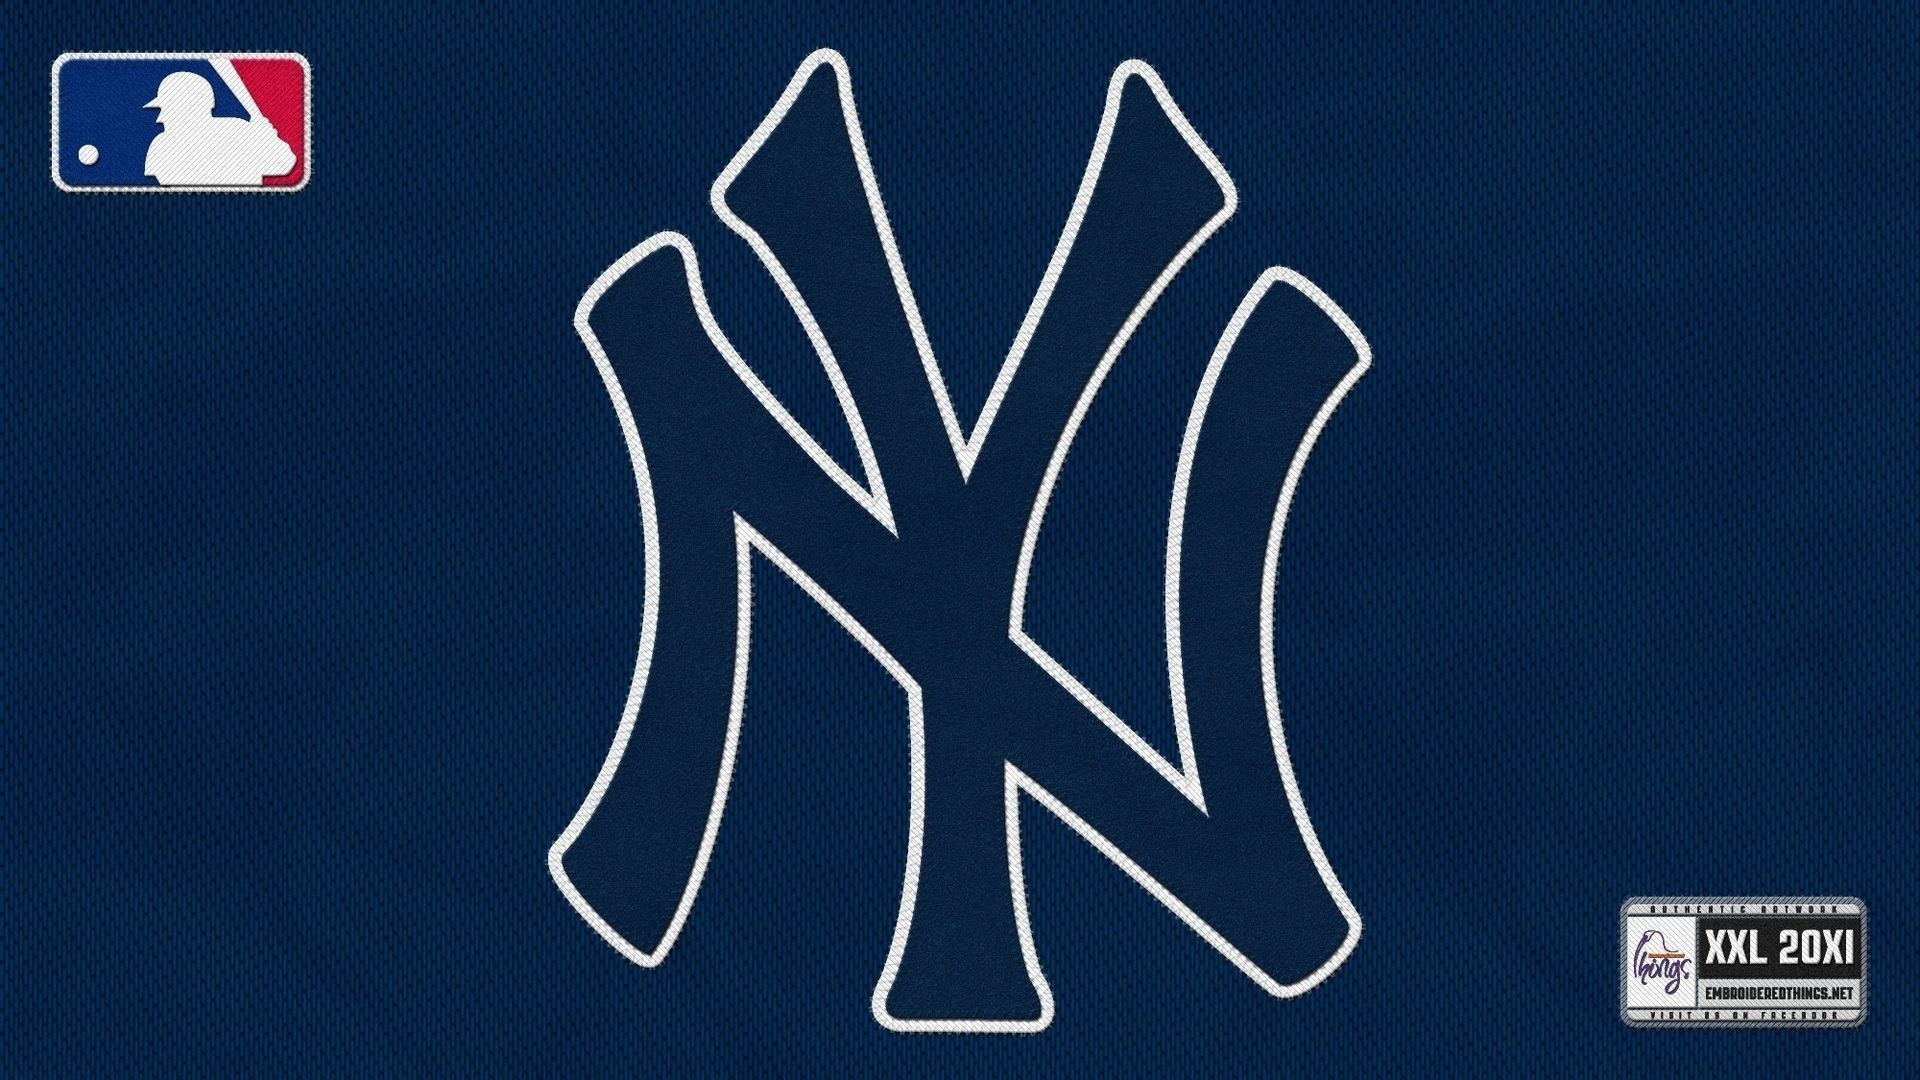 New York Yankees Wallpaper HD with high-resolution 1920x1080 pixel. You can use this wallpaper for Mac Desktop Wallpaper, Laptop Screensavers, Android Wallpapers, Tablet or iPhone Home Screen and another mobile phone device